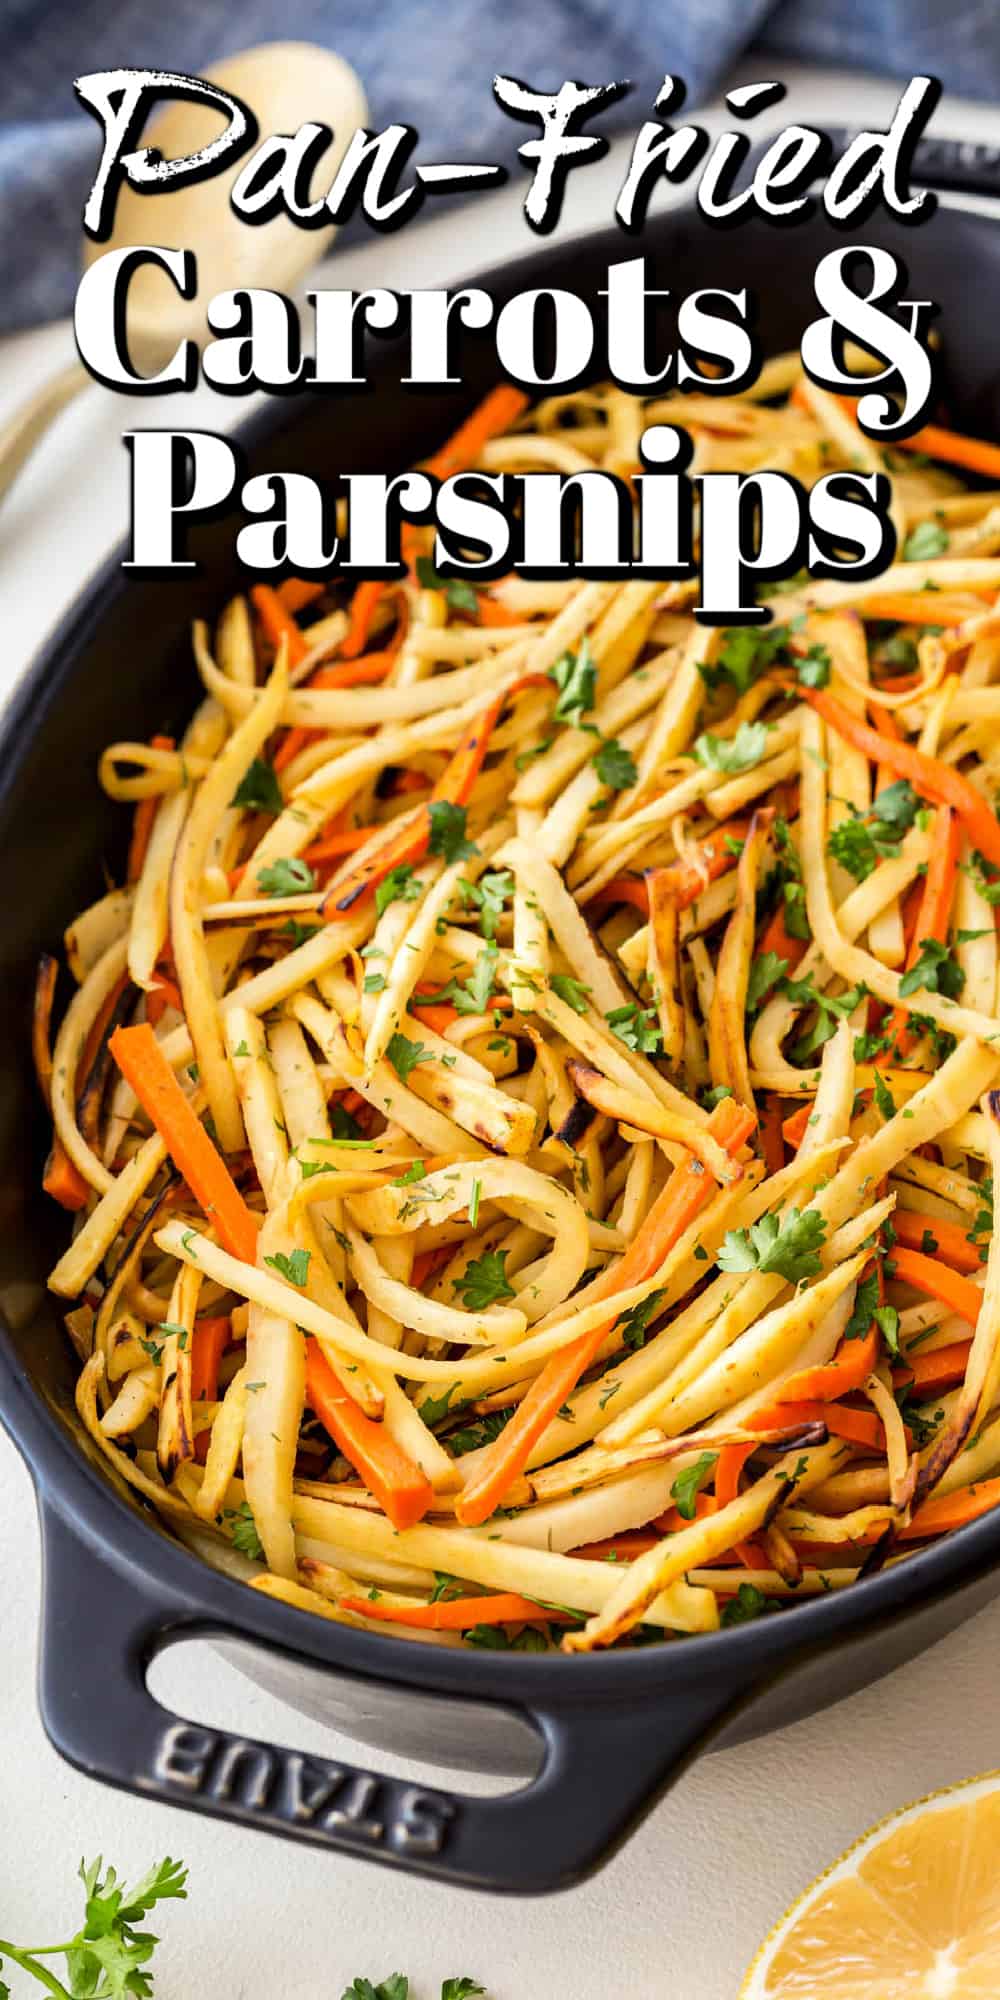 Pan-Fried Carrot and Parsnip Recipe Pin